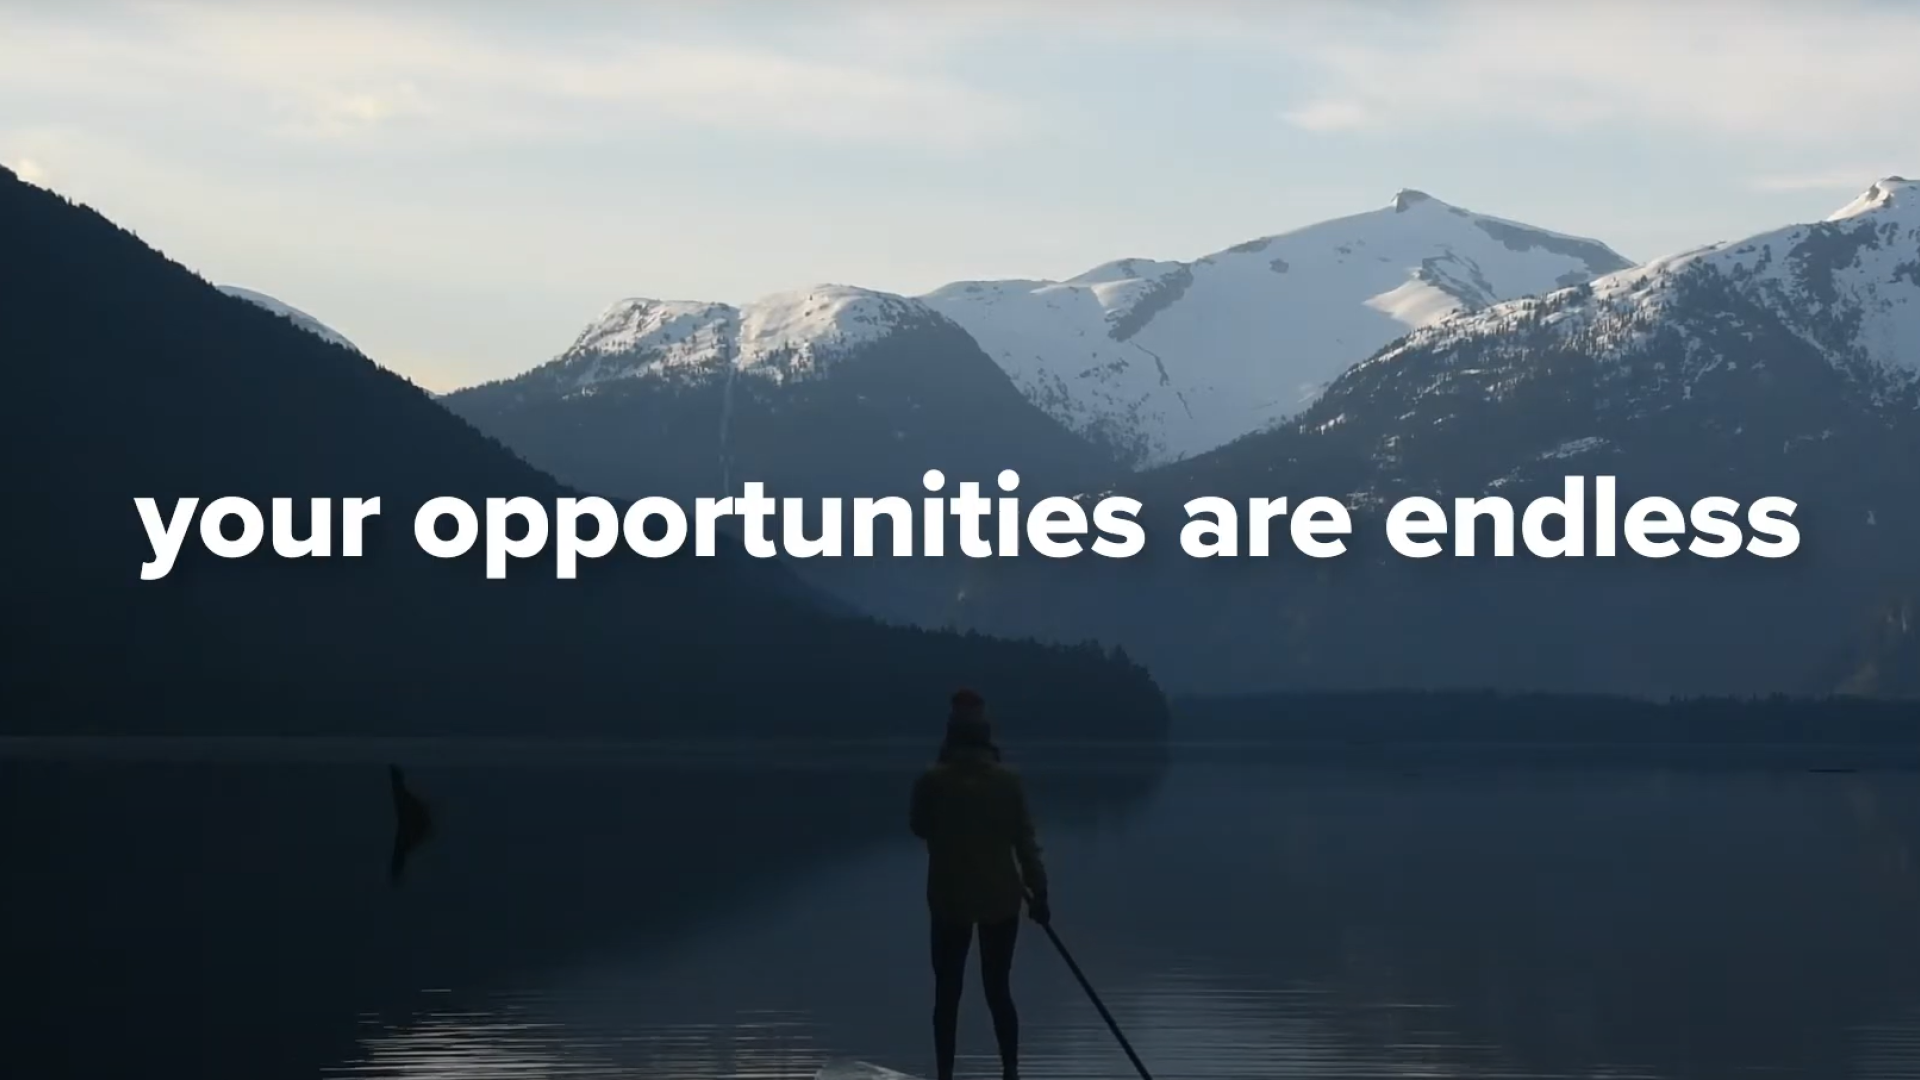 Your opportunities are endless text on screen